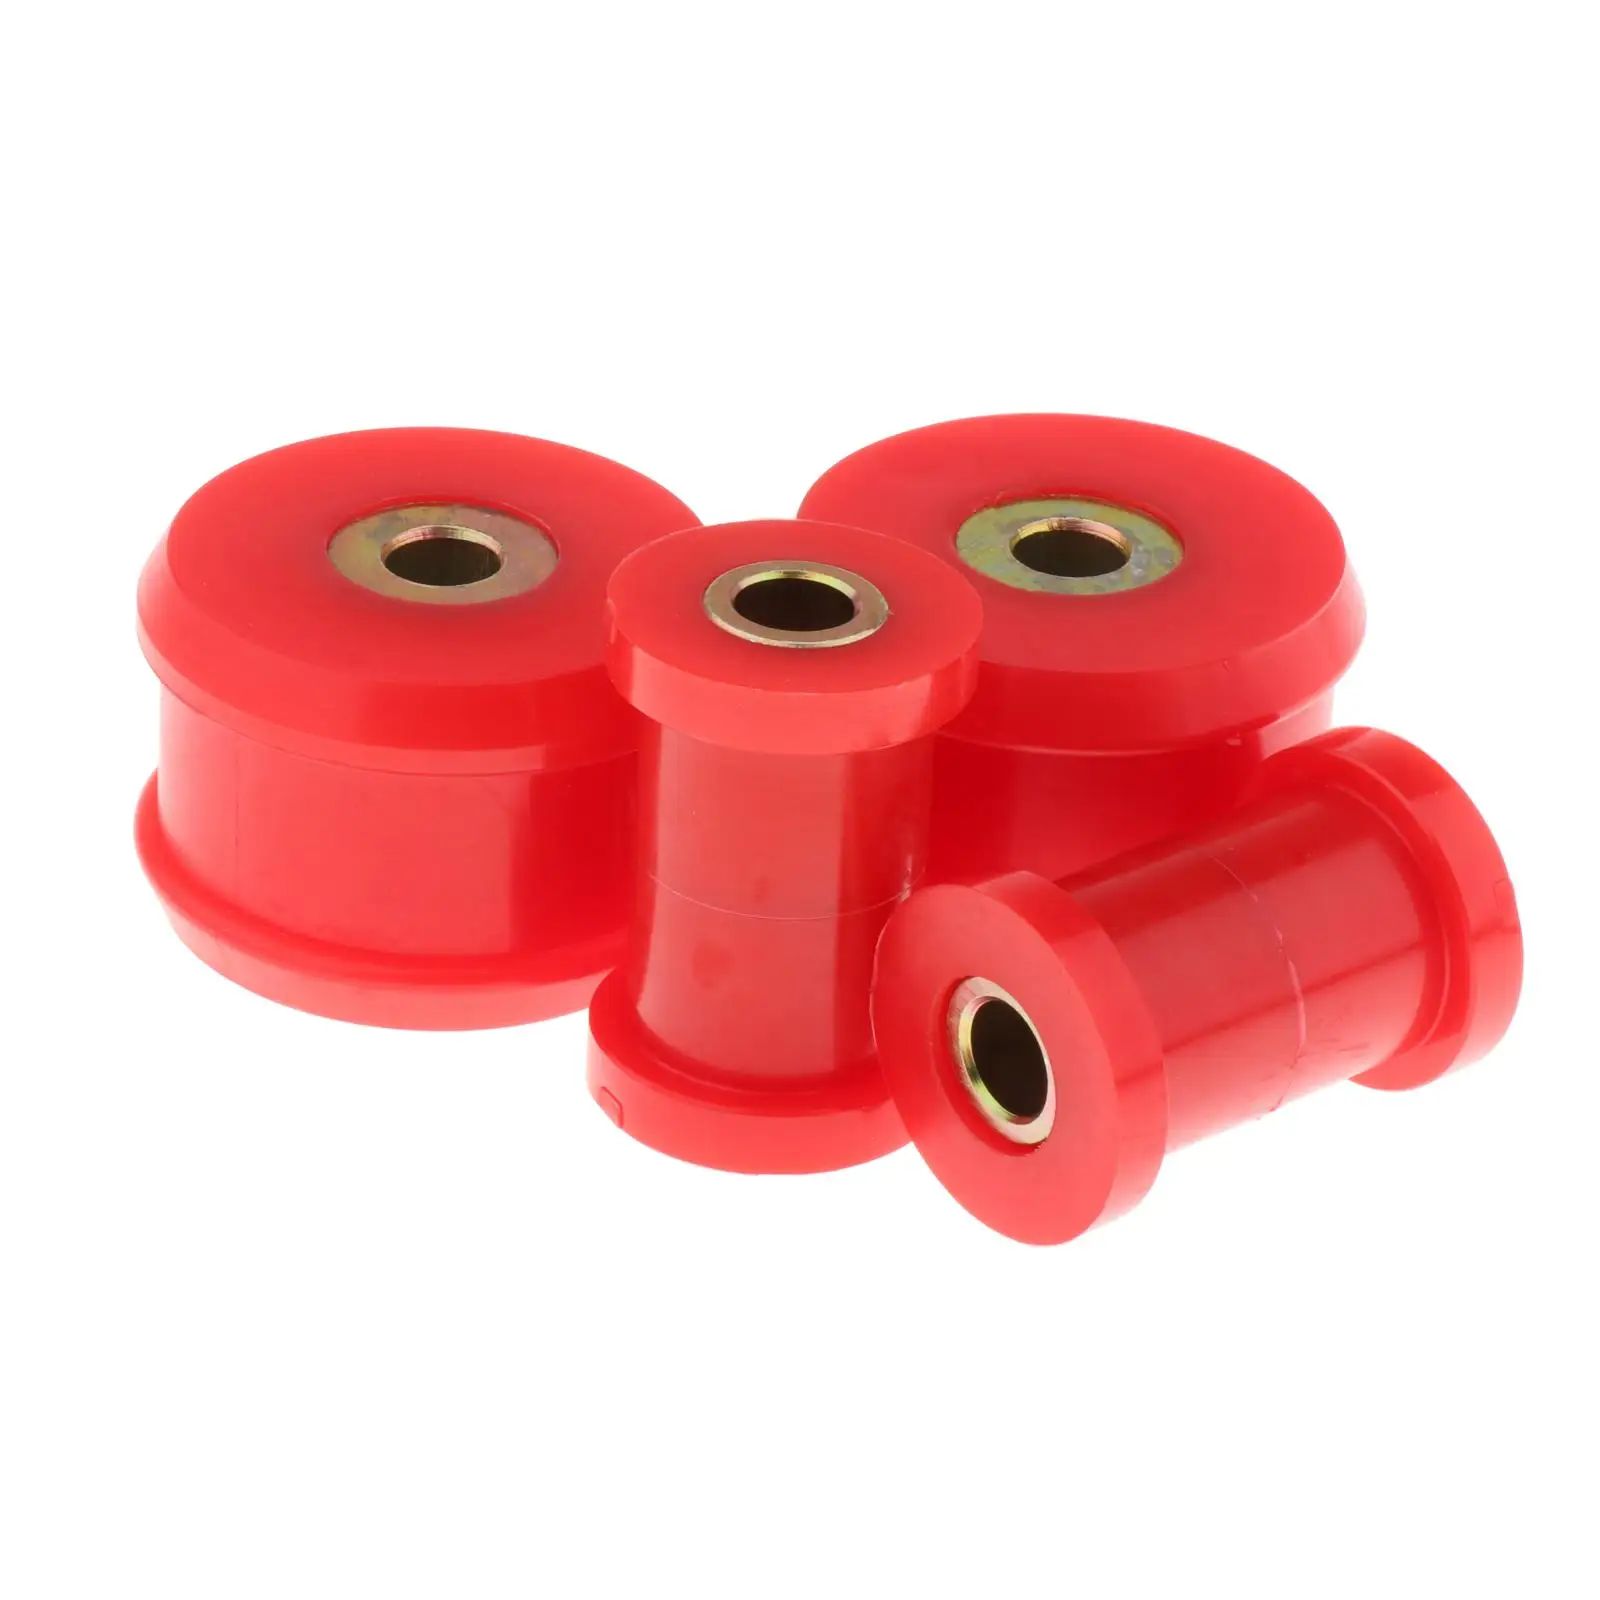 Automotive Front Control Arm Bushing Kit Red for VW Beetle MK4 1998 1999 2000 2001 2002 2003 2004 2005 2006